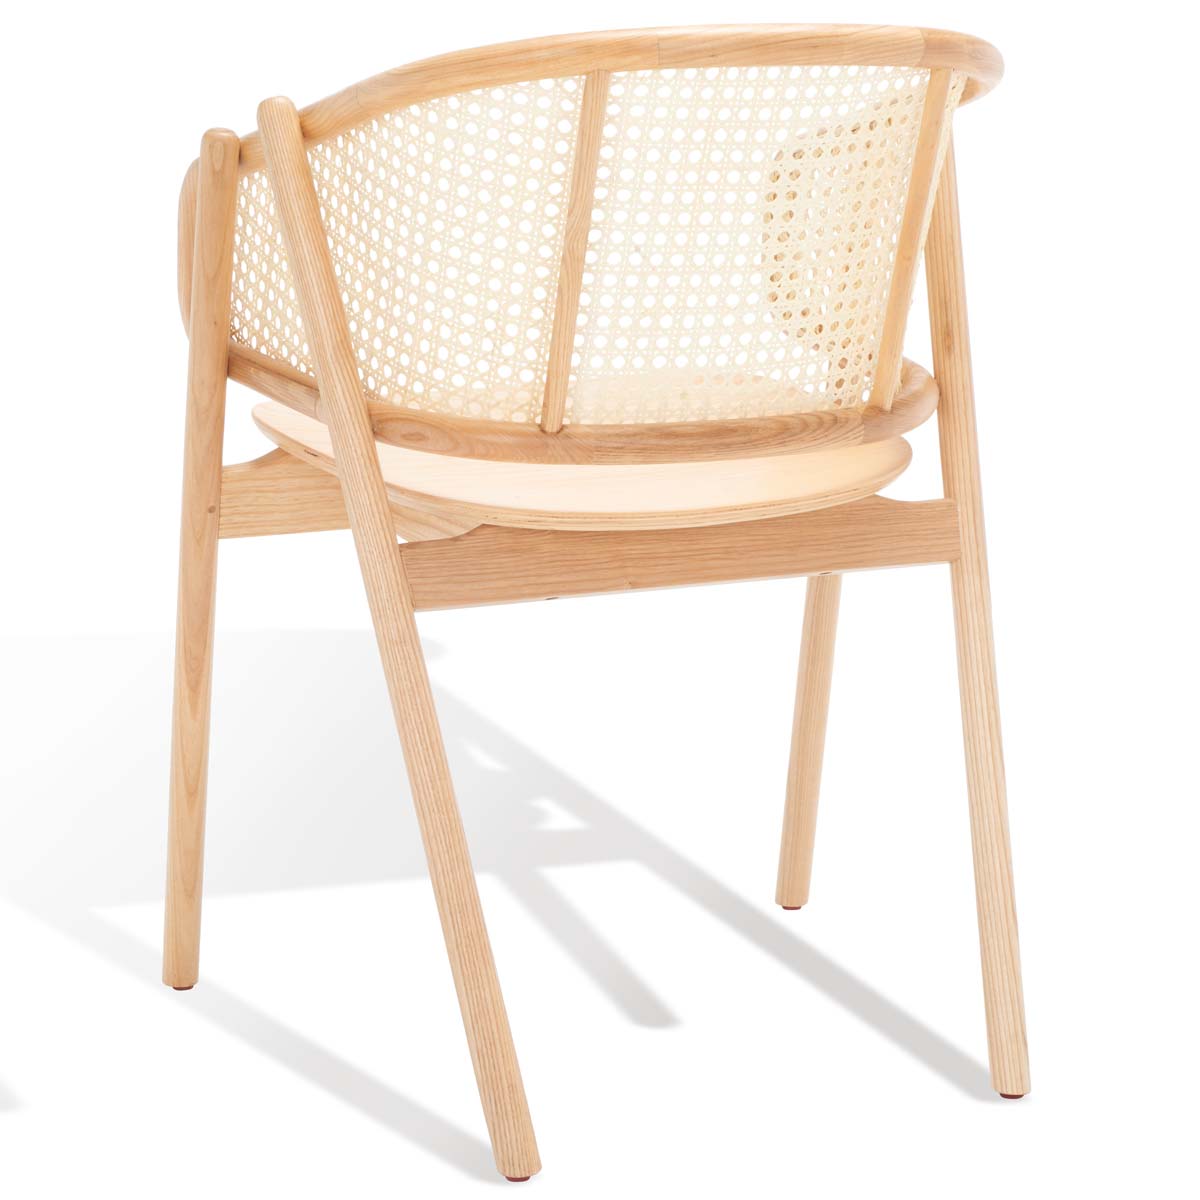 Safavieh Couture Emmy Rattan Back Dining Chair , SFV4128 - Natural